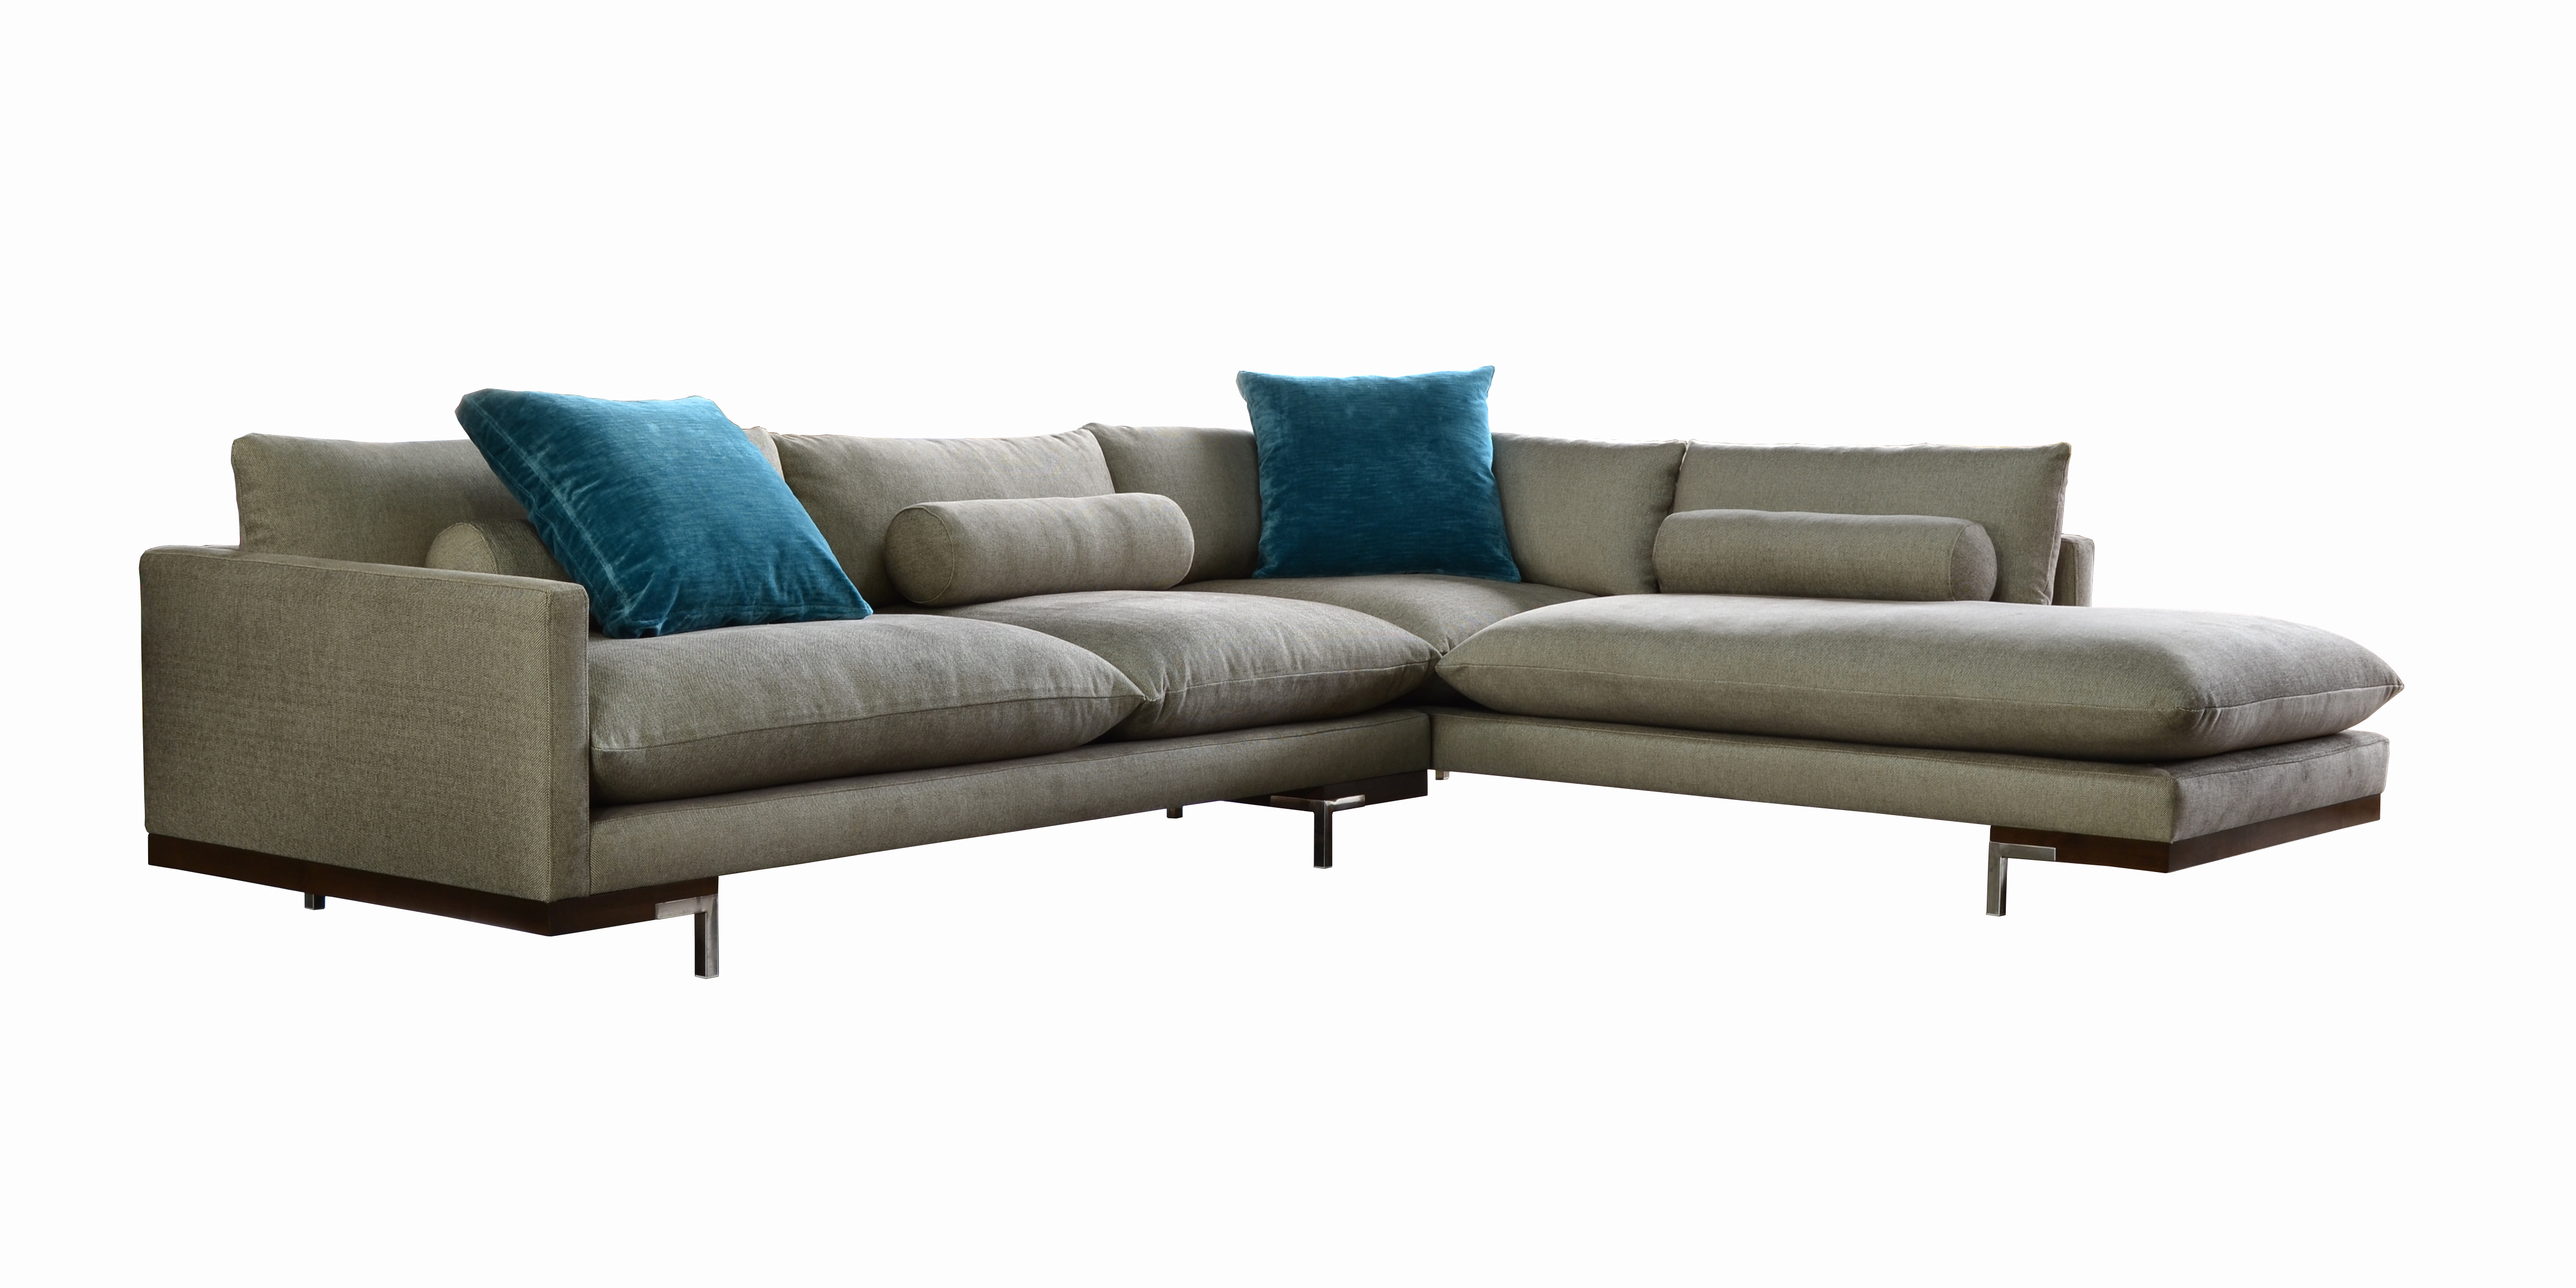 Bonn sectional sofa with blue pillows from Nathan Anthony